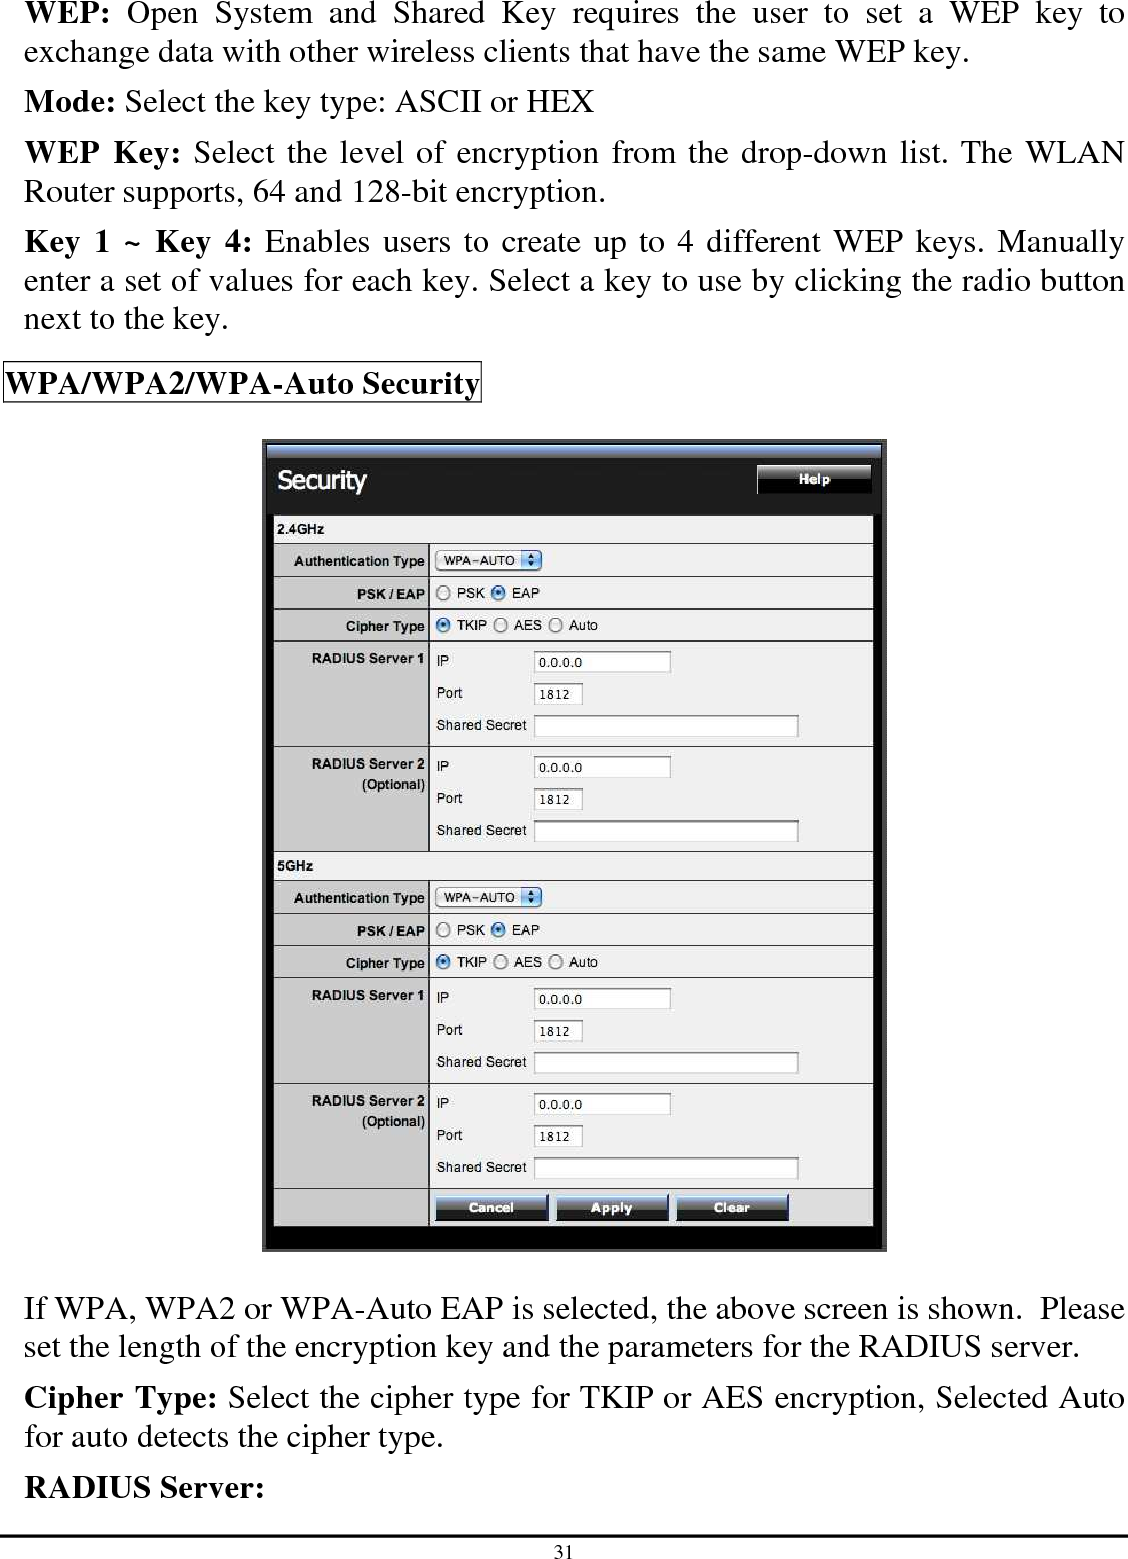 31 WEP:  Open  System  and  Shared  Key  requires  the  user  to  set  a  WEP  key  to exchange data with other wireless clients that have the same WEP key. Mode: Select the key type: ASCII or HEX WEP Key: Select the level of encryption from the drop-down list. The WLAN Router supports, 64 and 128-bit encryption. Key 1 ~ Key 4: Enables users to create up to 4 different WEP keys. Manually enter a set of values for each key. Select a key to use by clicking the radio button next to the key.  WPA/WPA2/WPA-Auto Security    If WPA, WPA2 or WPA-Auto EAP is selected, the above screen is shown.  Please set the length of the encryption key and the parameters for the RADIUS server. Cipher Type: Select the cipher type for TKIP or AES encryption, Selected Auto for auto detects the cipher type.  RADIUS Server: 